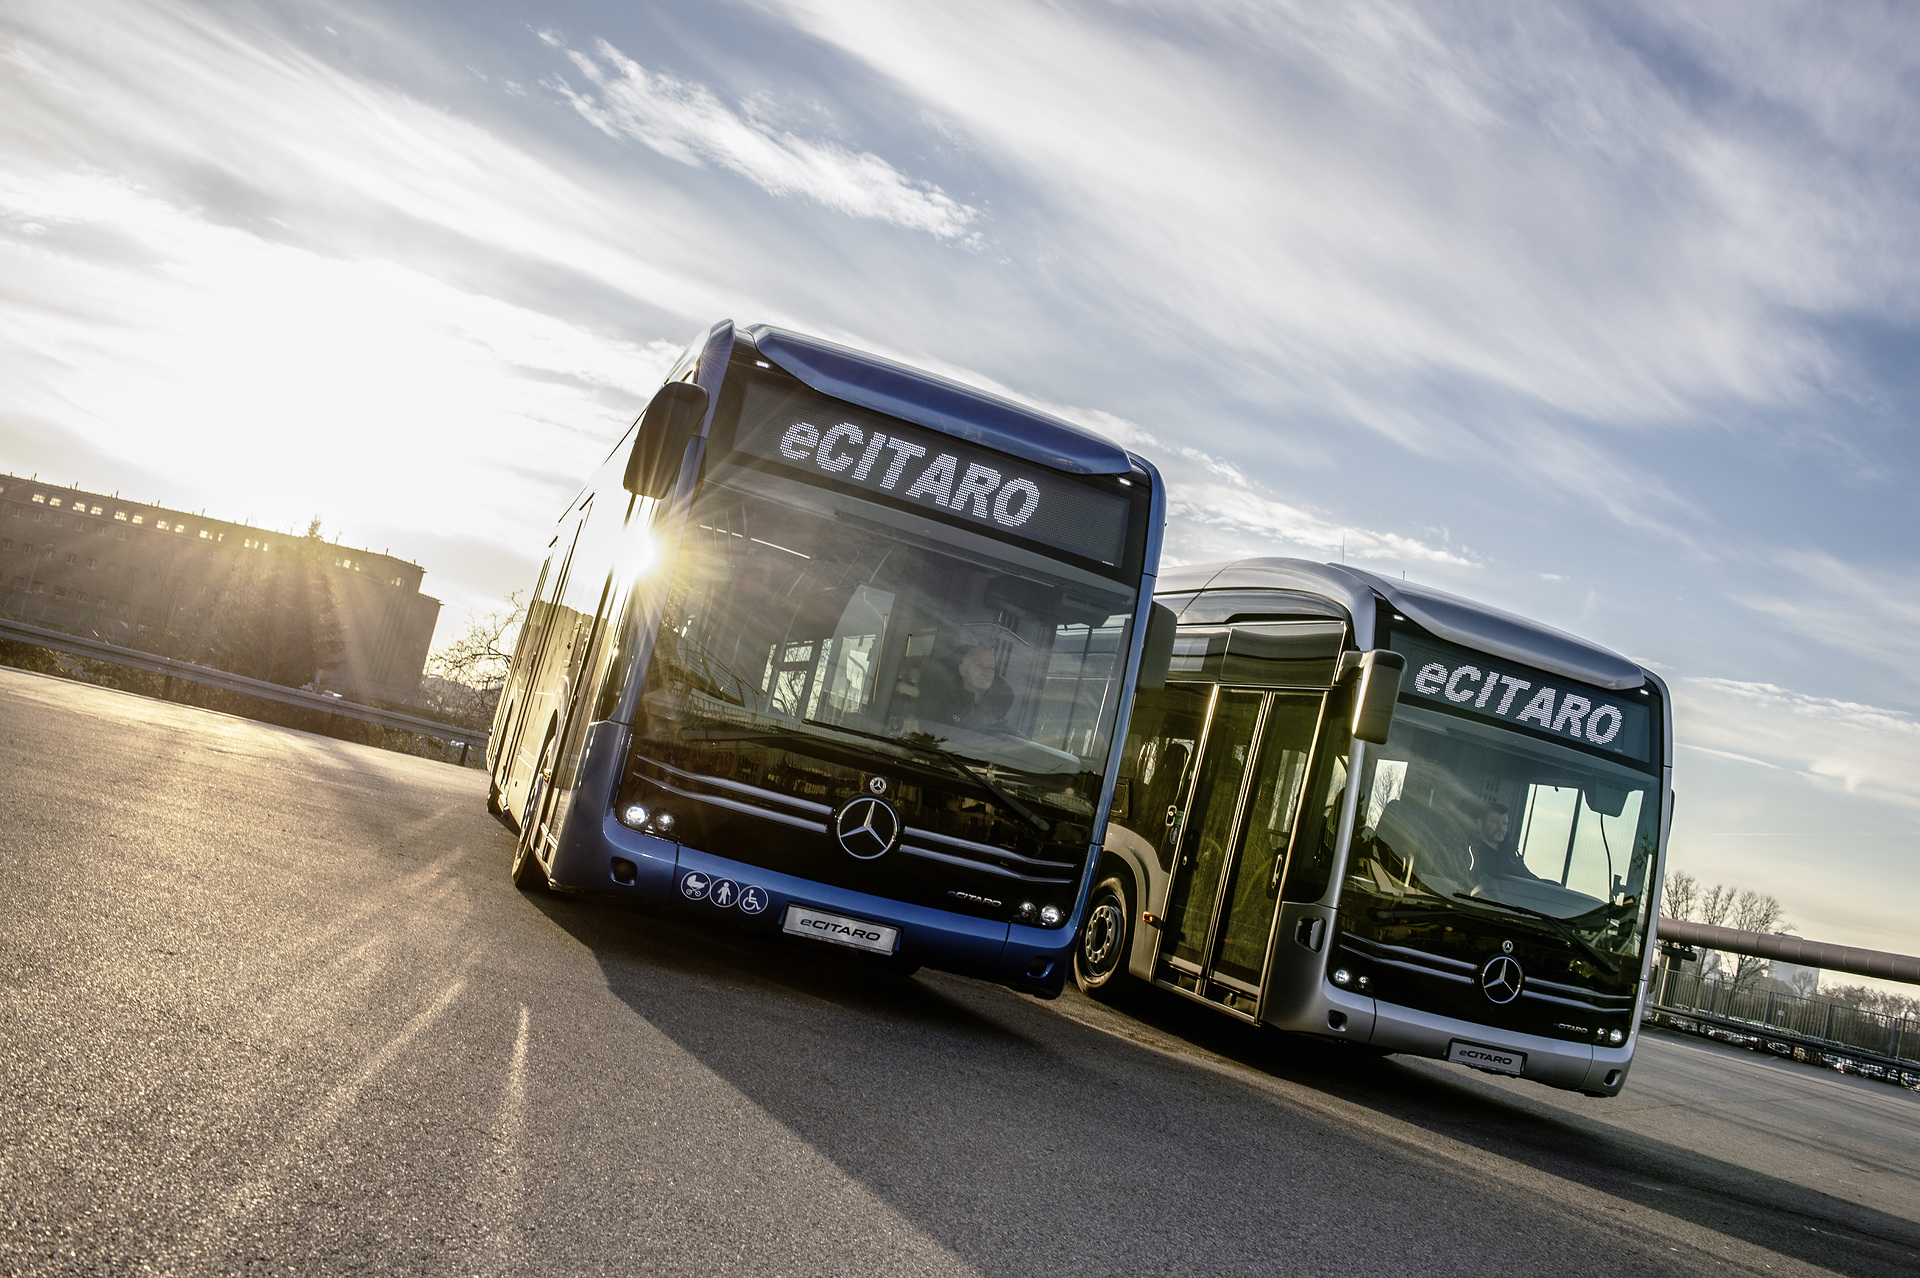 GPTS in Stockholm: Mercedes Benz at the congress of the International Association of Public Transport: the fully-electric eCitaro and digital services